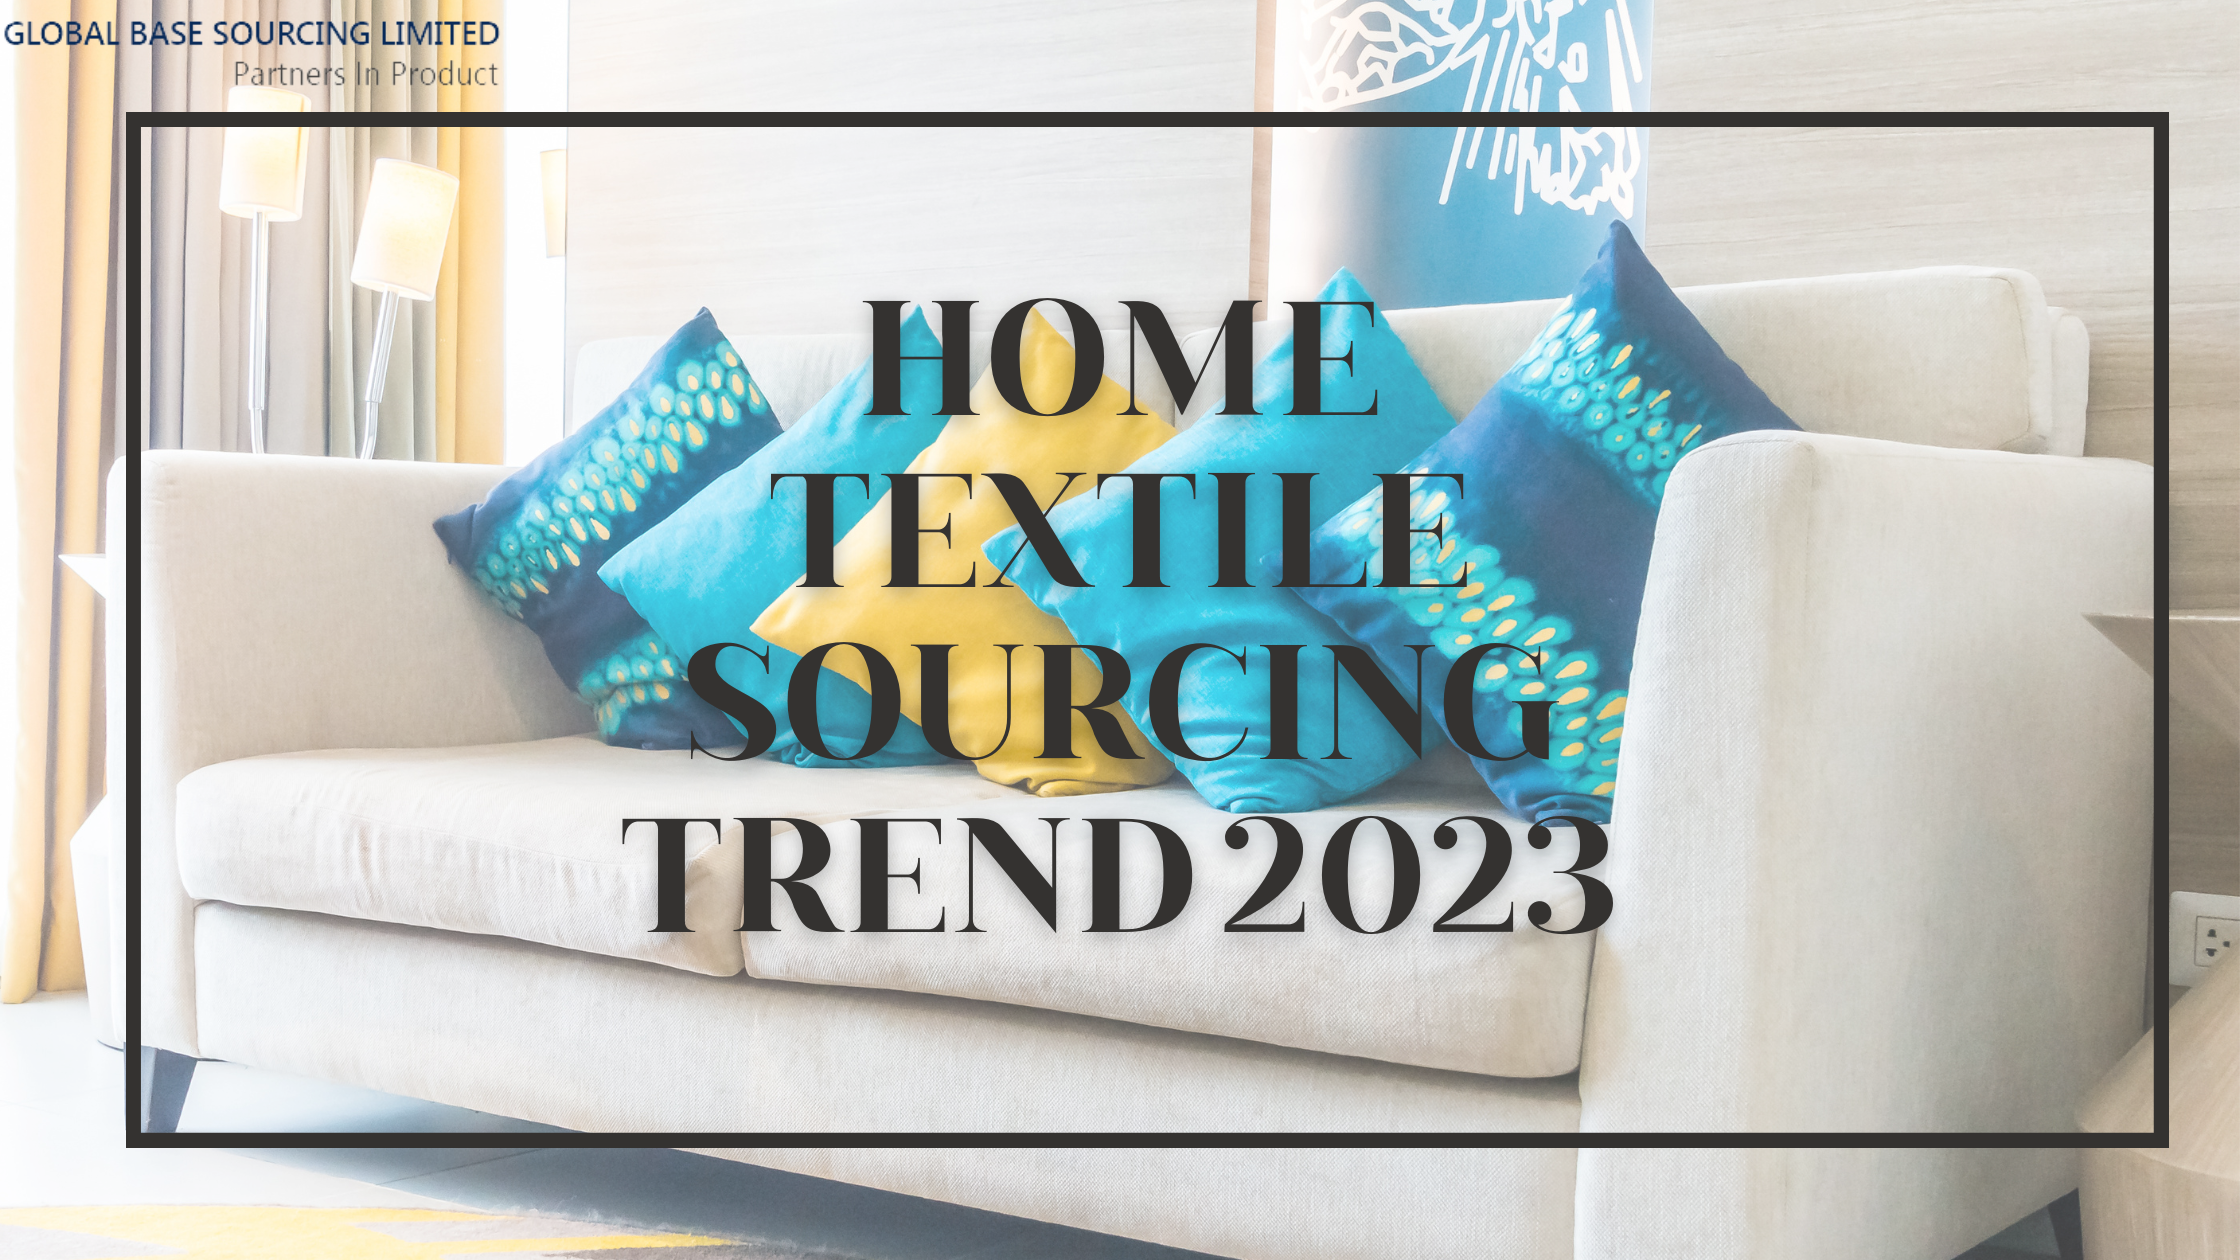 Home Textile Sourcing Trend 2023